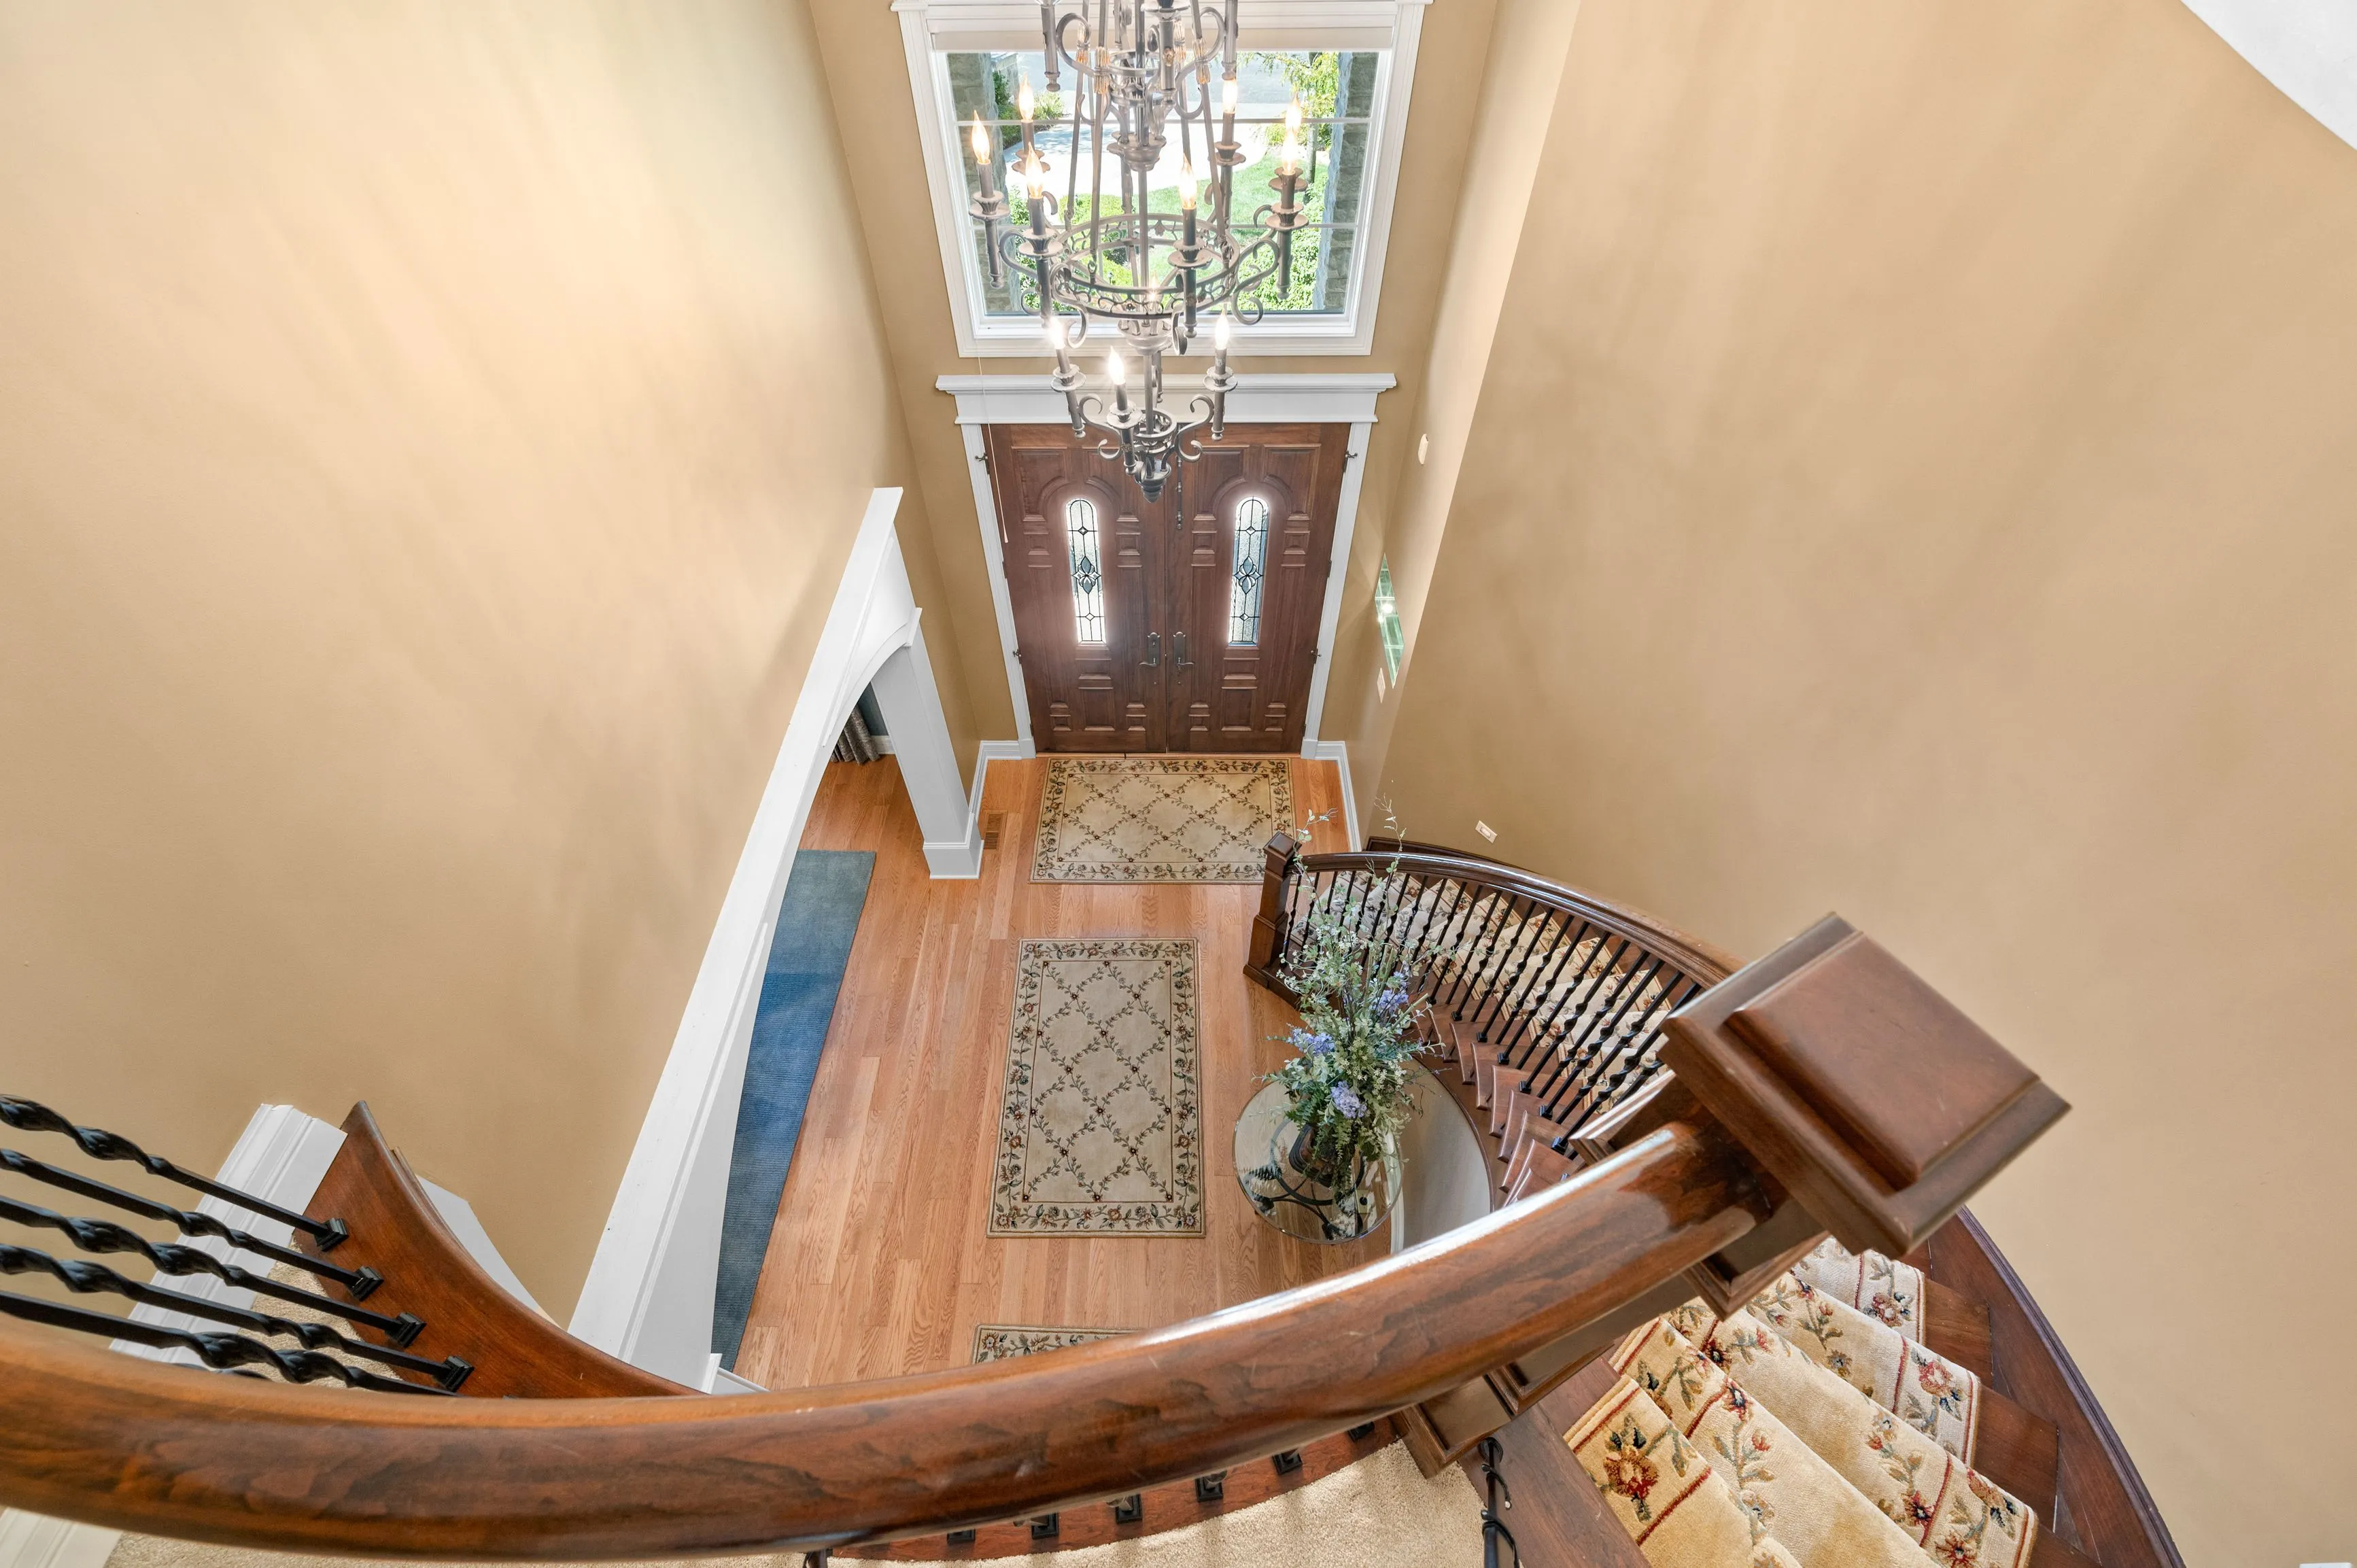 Elegant home entryway seen from the top of a staircase with hardwood floors, a large chandelier, and a double front door with glass panels.